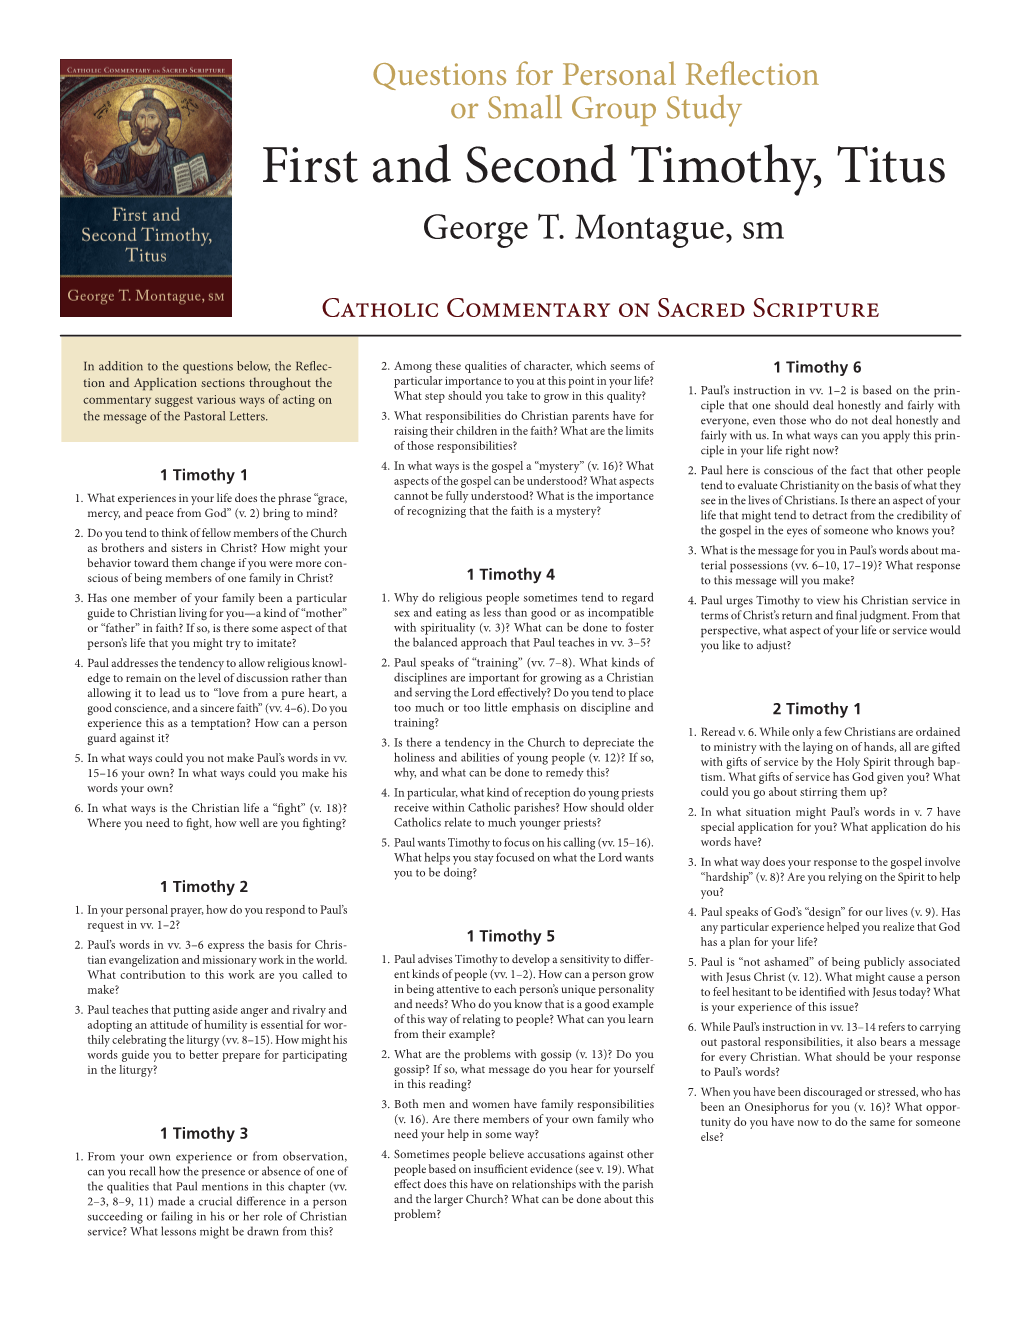 First and Second Timothy, Titus George T